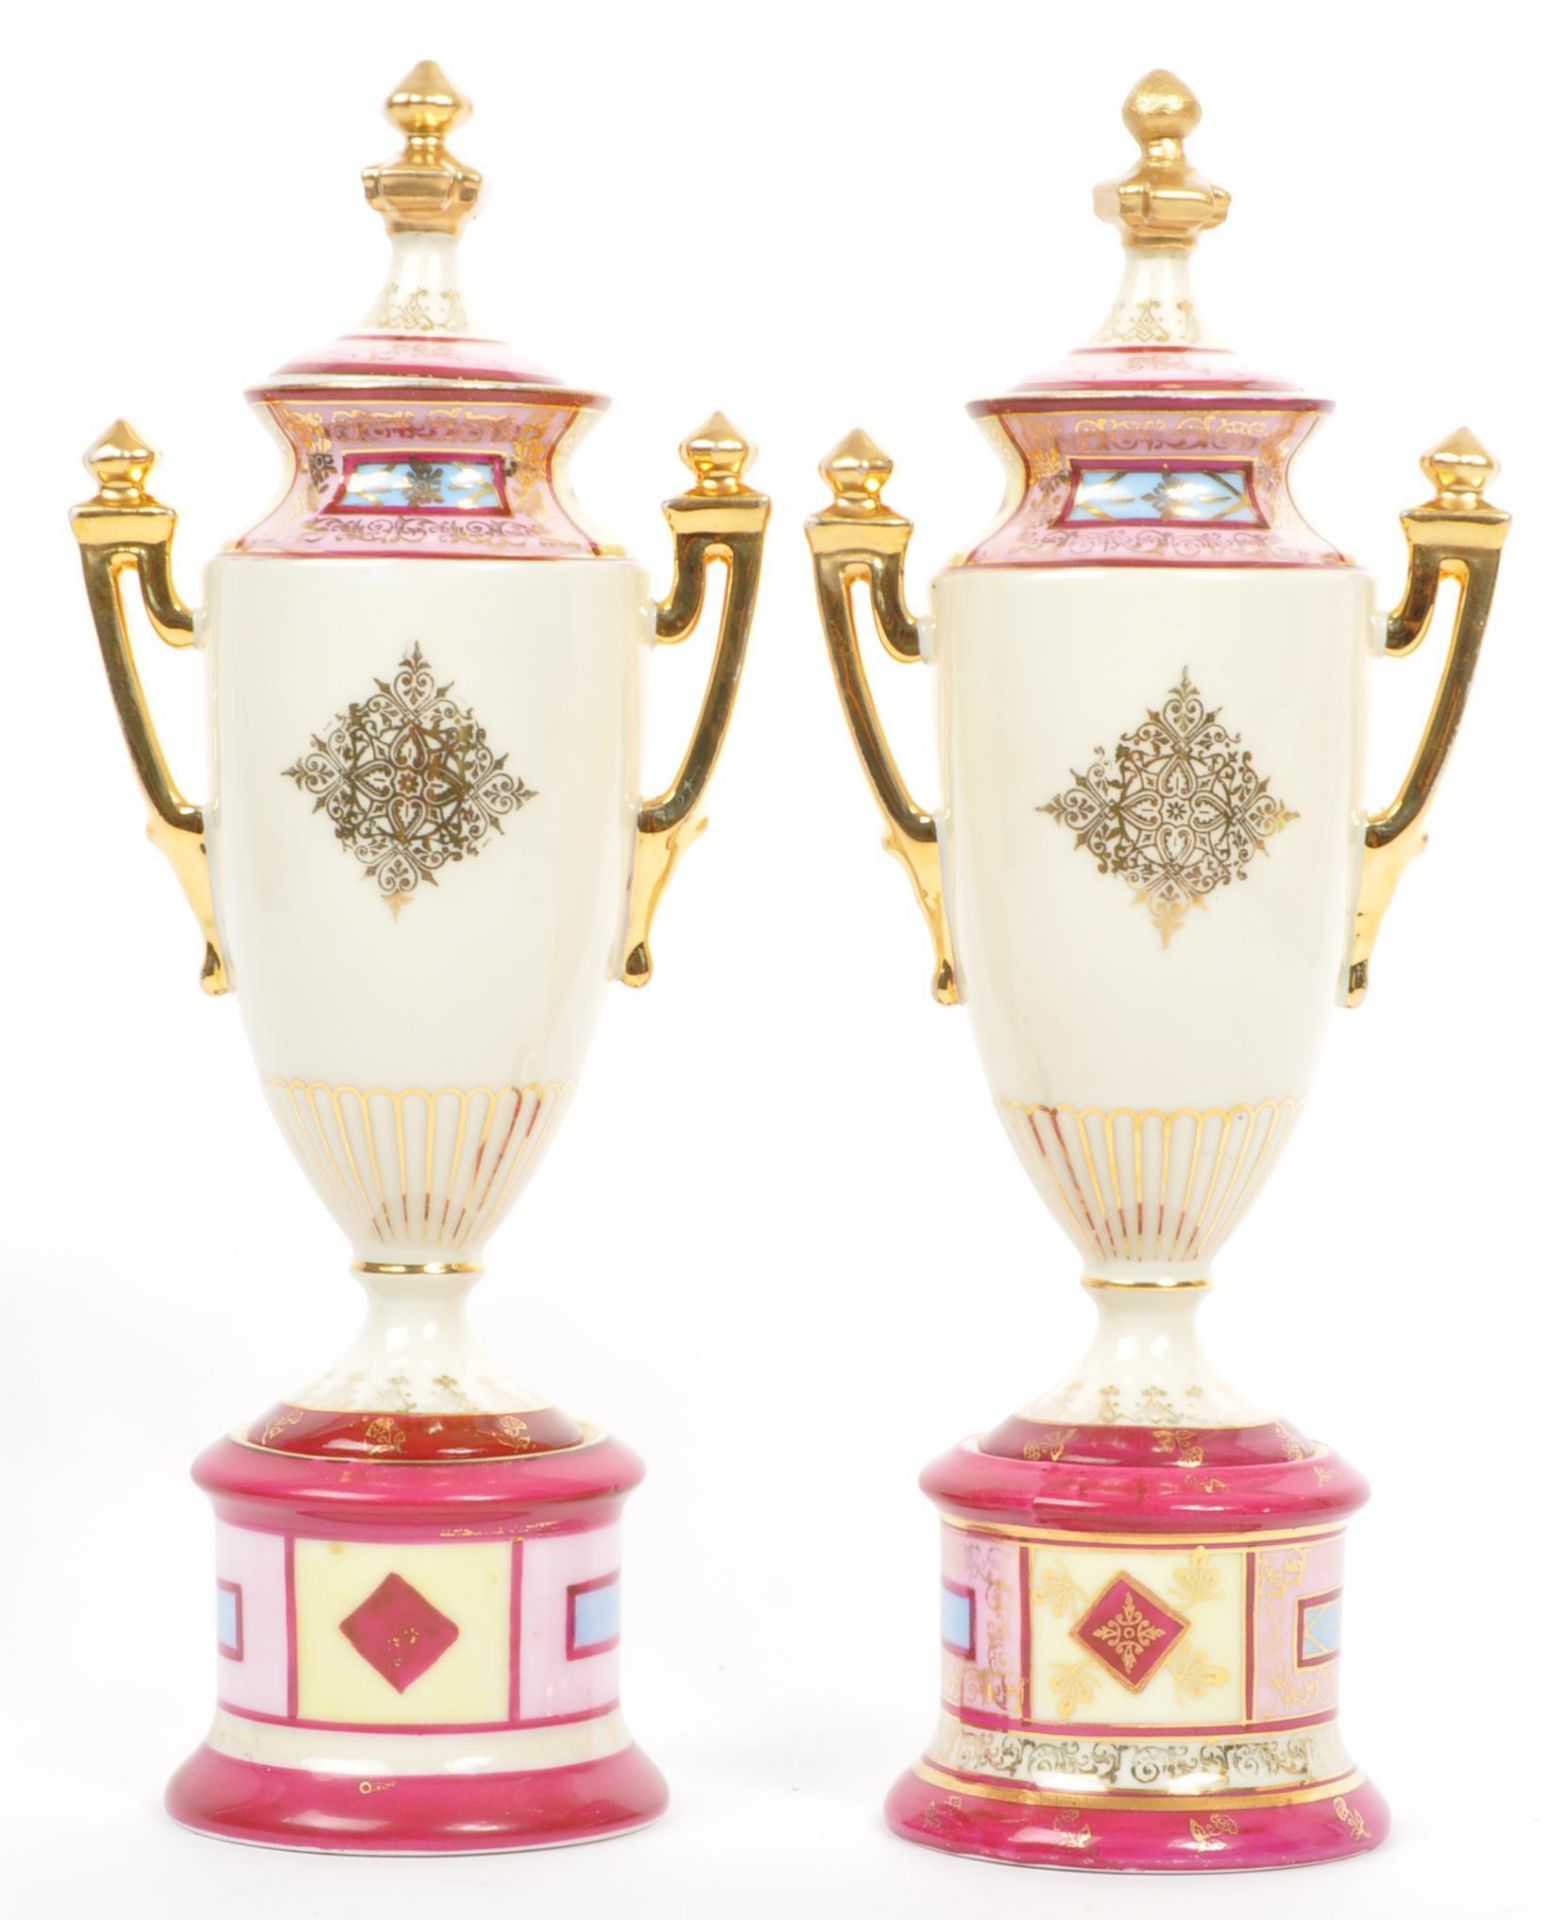 PAIR OF ANTIQUE GILDED GERMAN / AUSTRIAN TWIN HANDLED VASES - Image 3 of 8